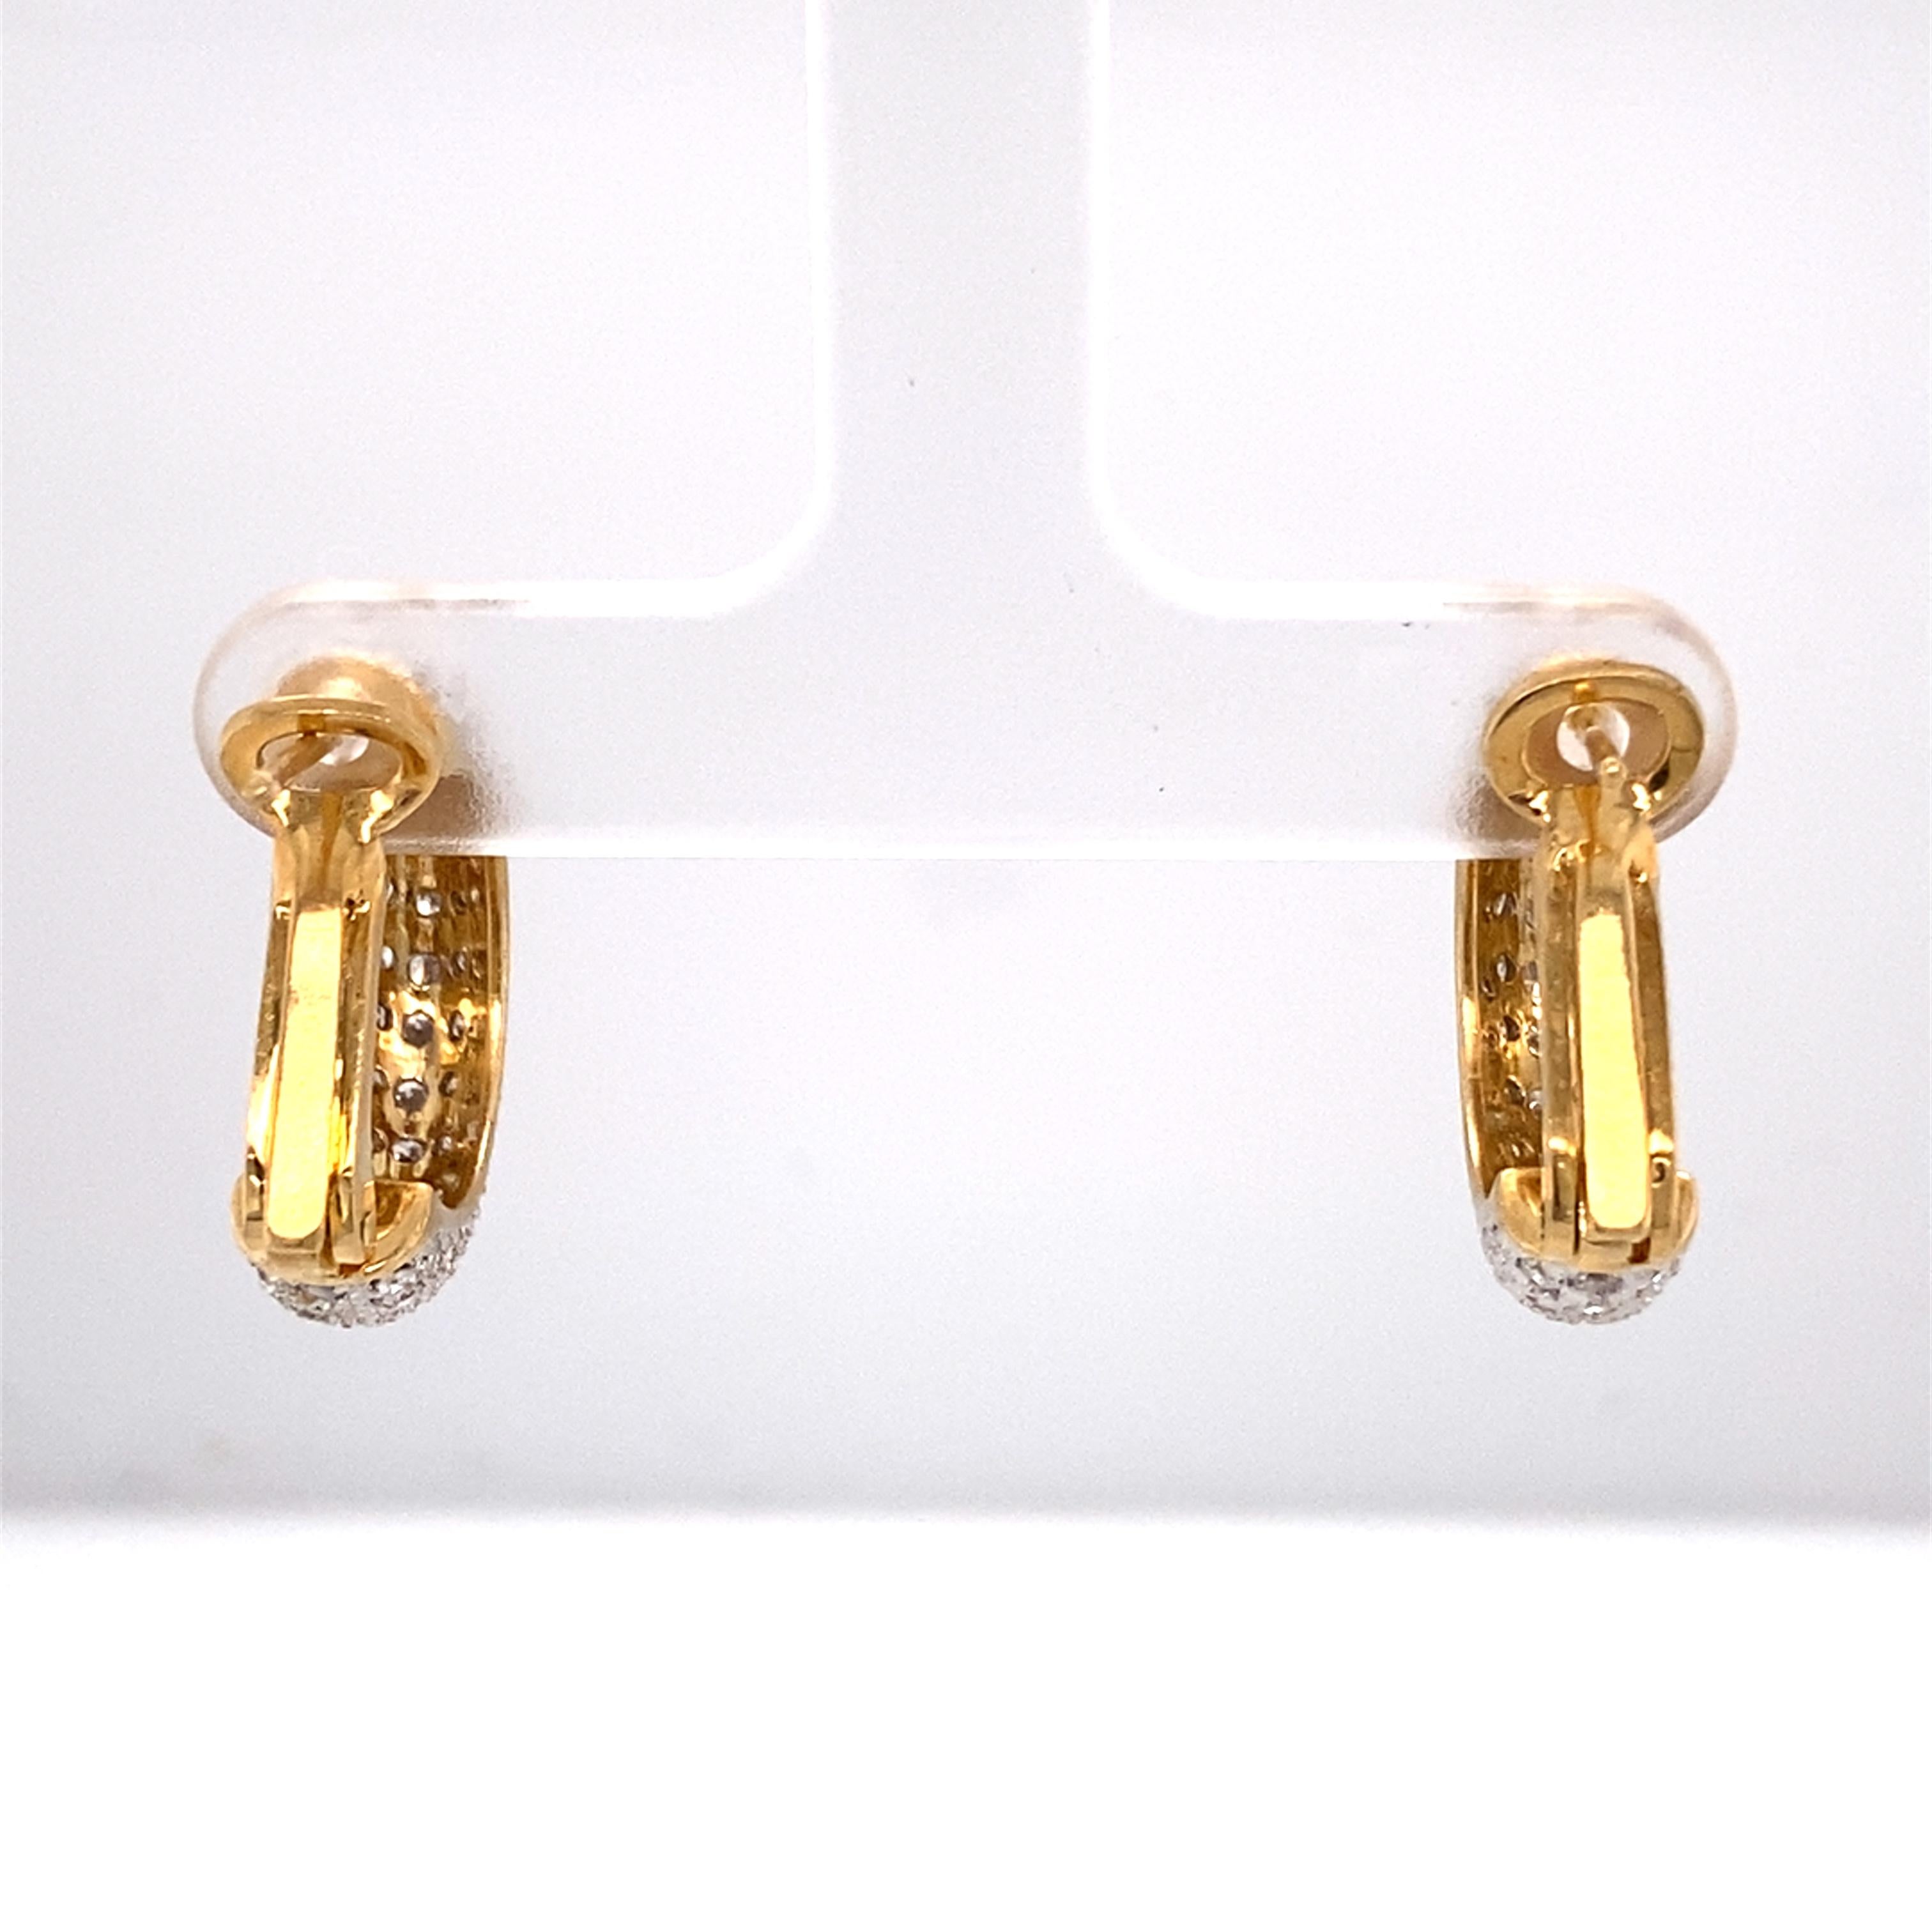 3.50 Carat Diamond Earrings in 18 Karat Two Tone Gold  In Excellent Condition For Sale In Atlanta, GA